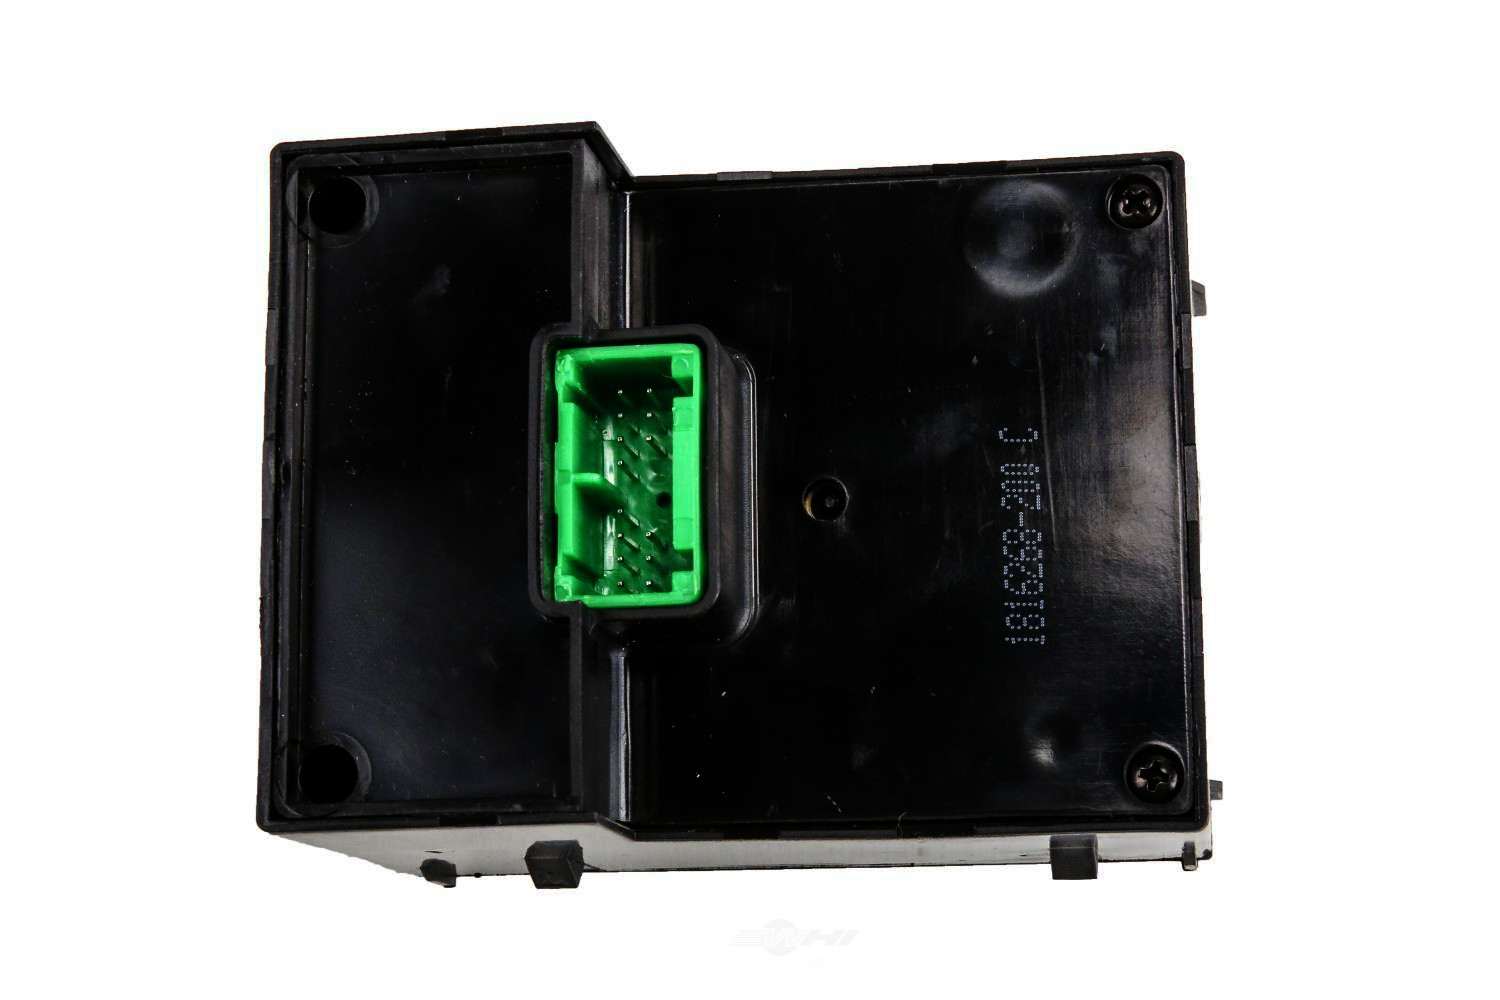 GM GENUINE PARTS CANADA - Headlight / Instrument Panel Dimmer and Dome Light Switch - GMC 19381535